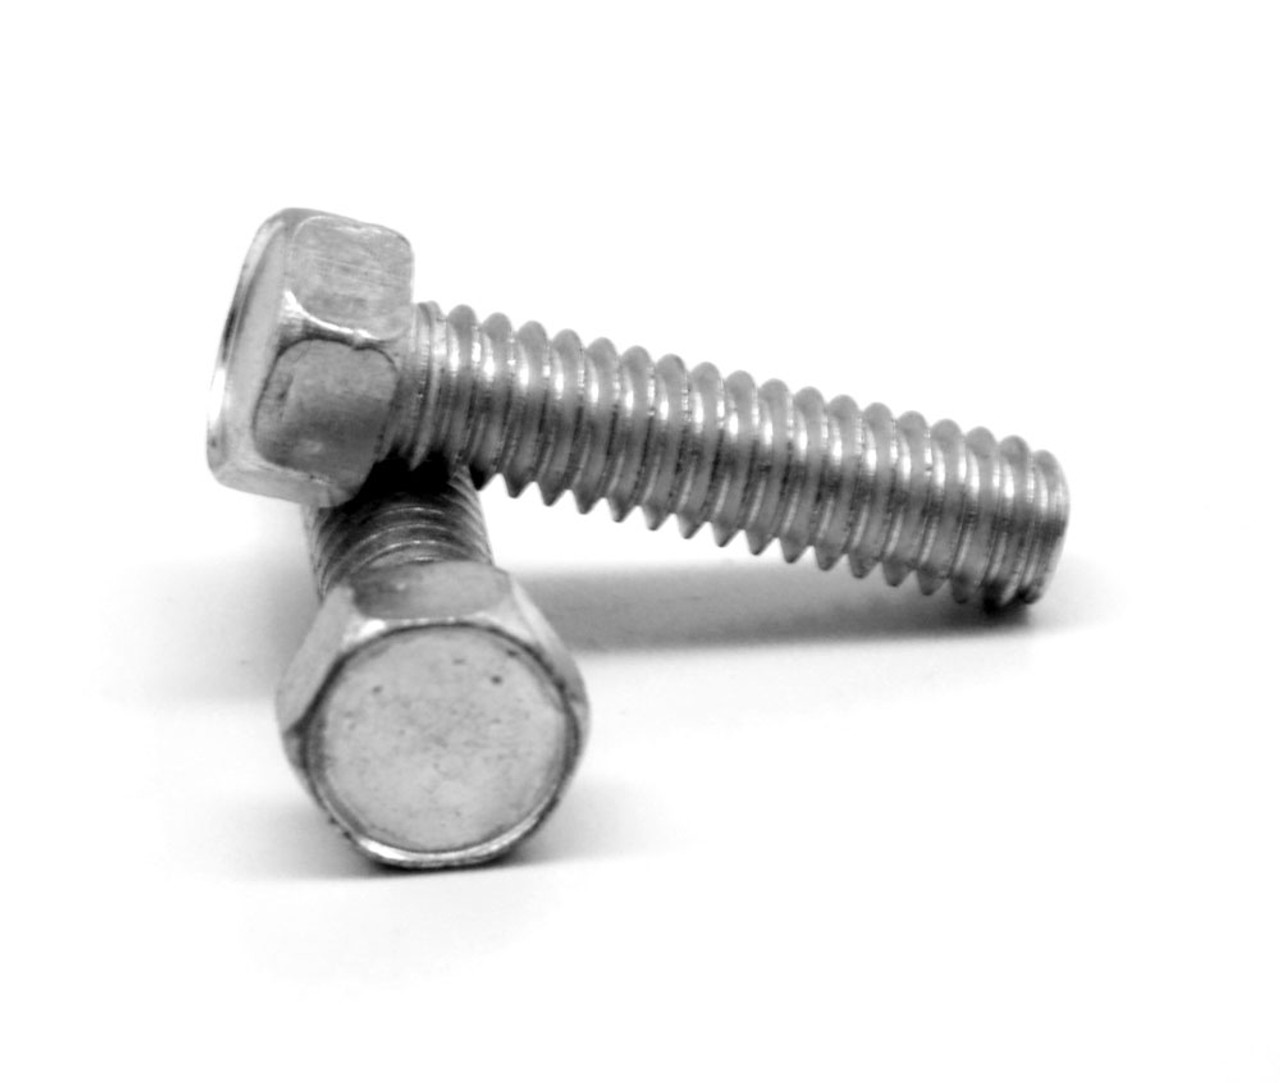 1/4"-20 x 1 1/4" (FT) Coarse Thread Machine Screw Indented Hex Head Low Carbon Steel Zinc Plated